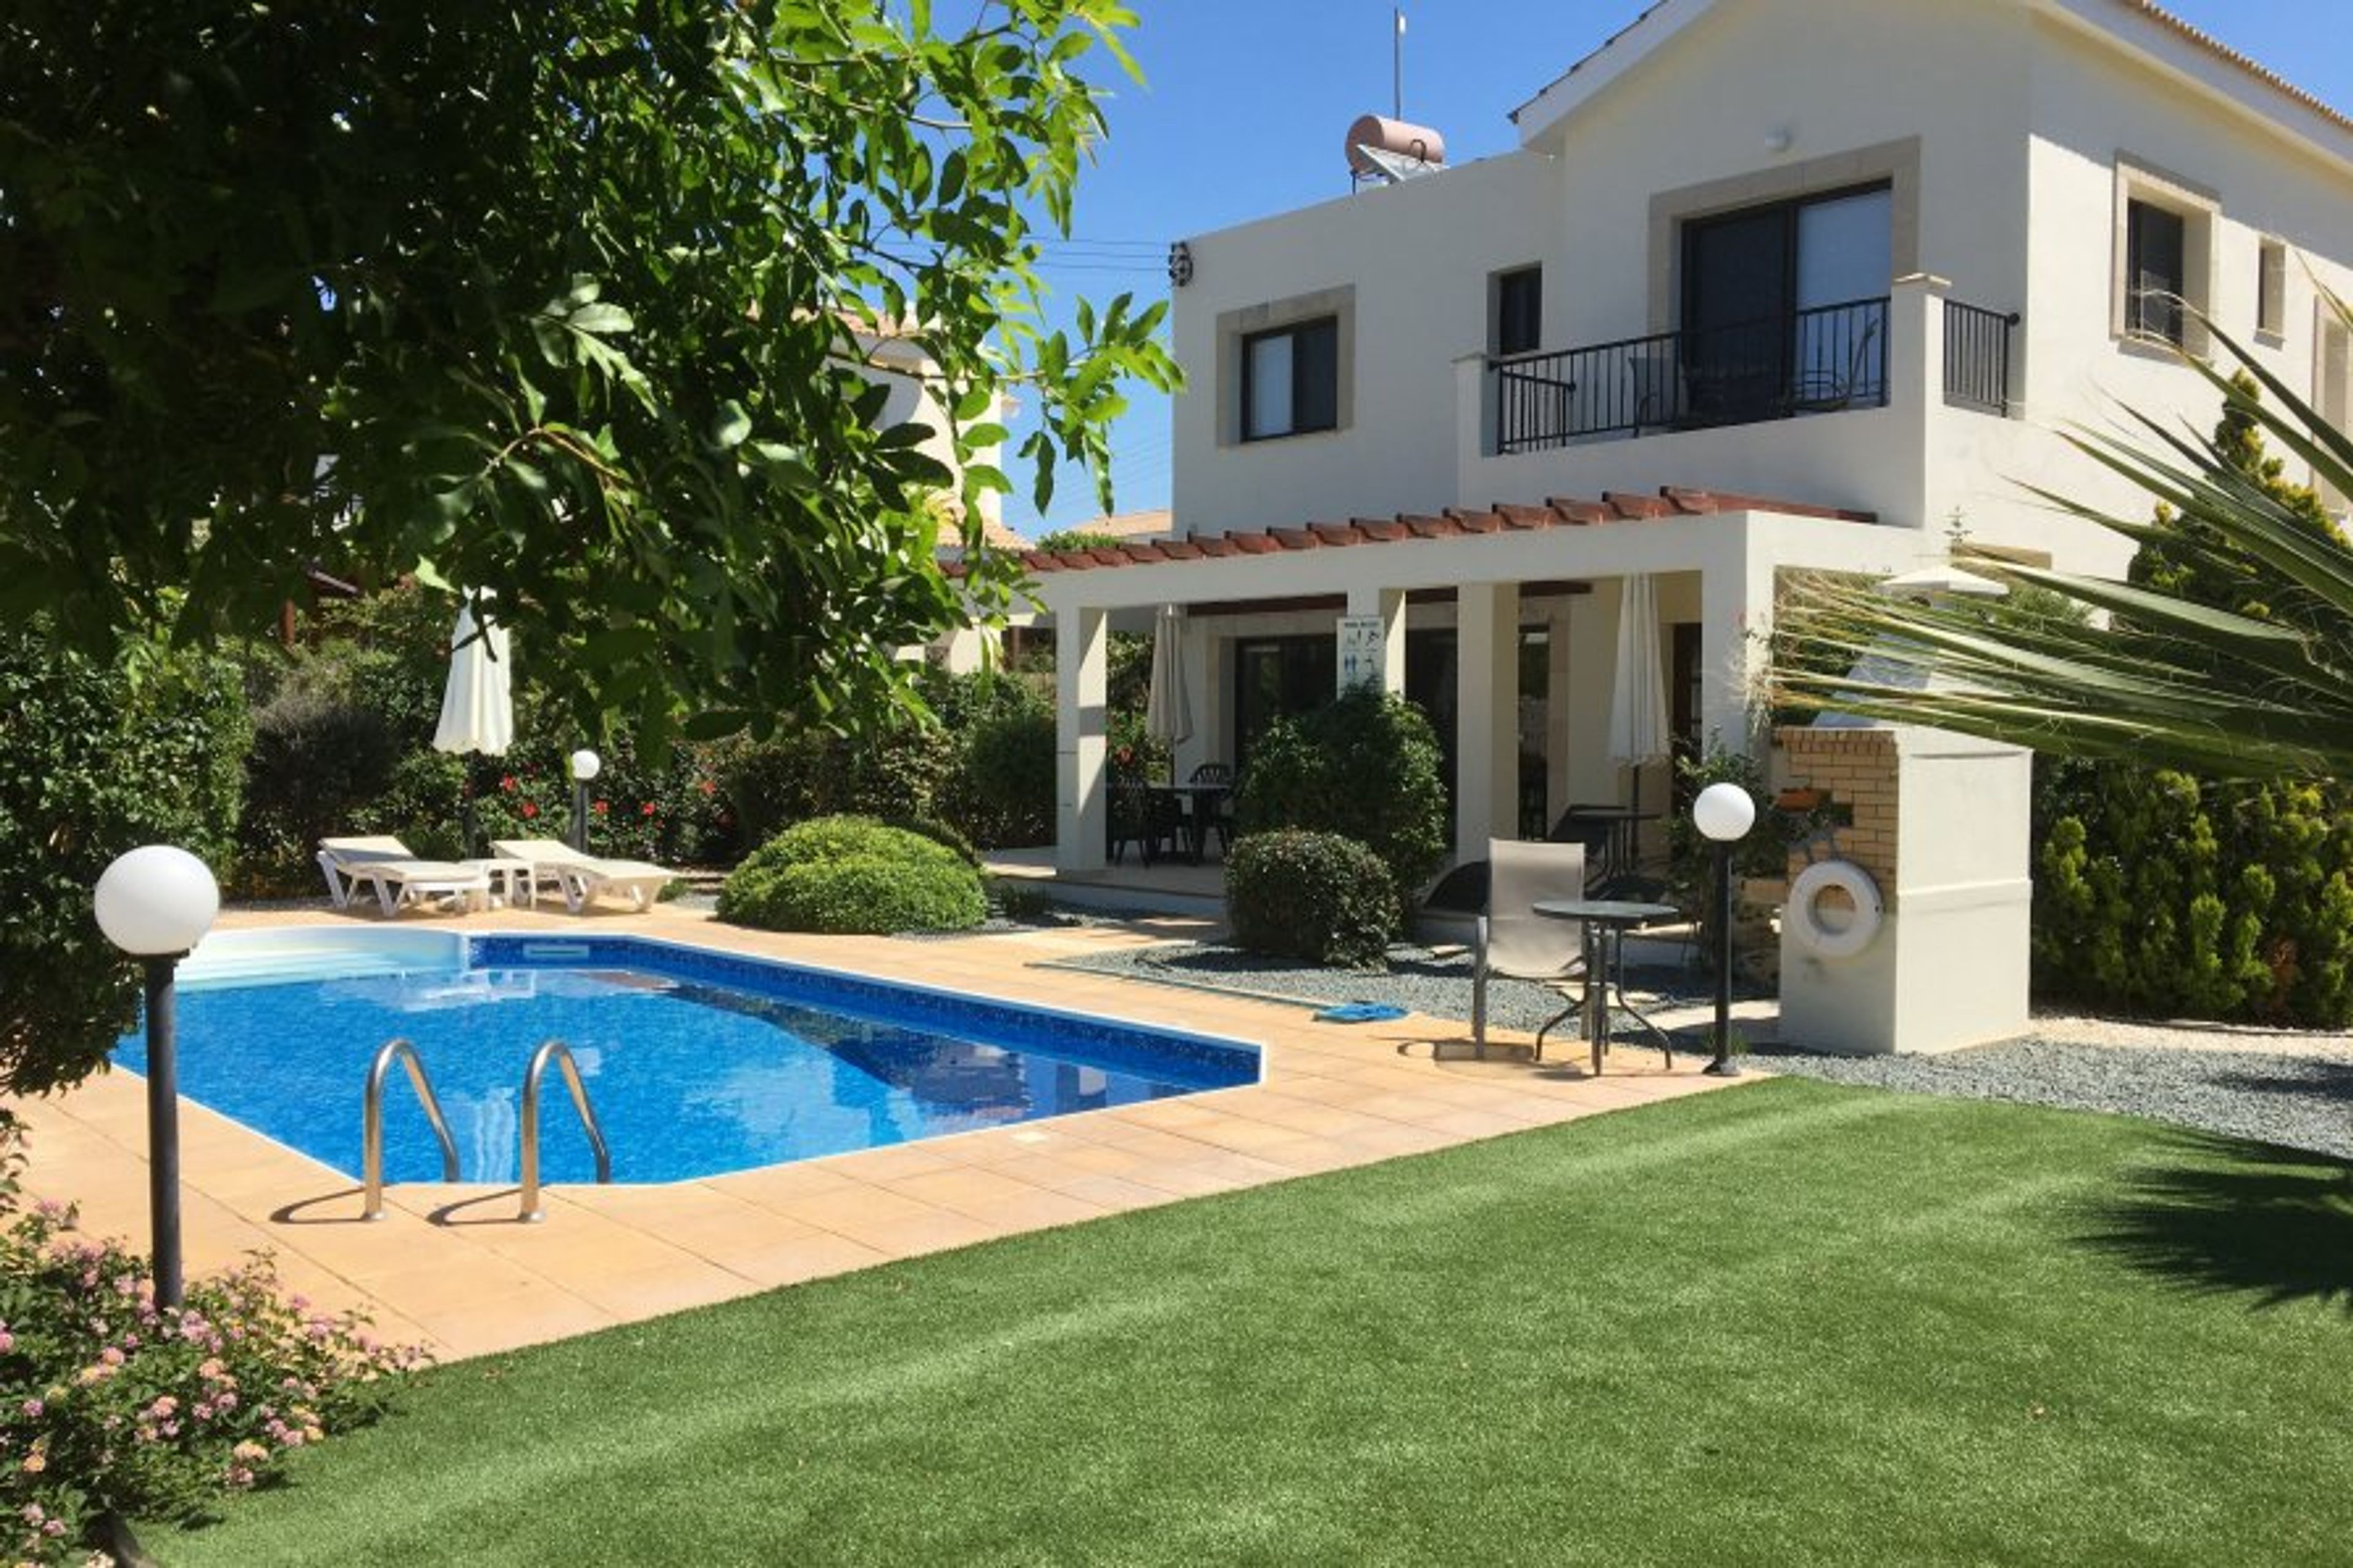 Luxury 3 bed villa with private heated swimming pool